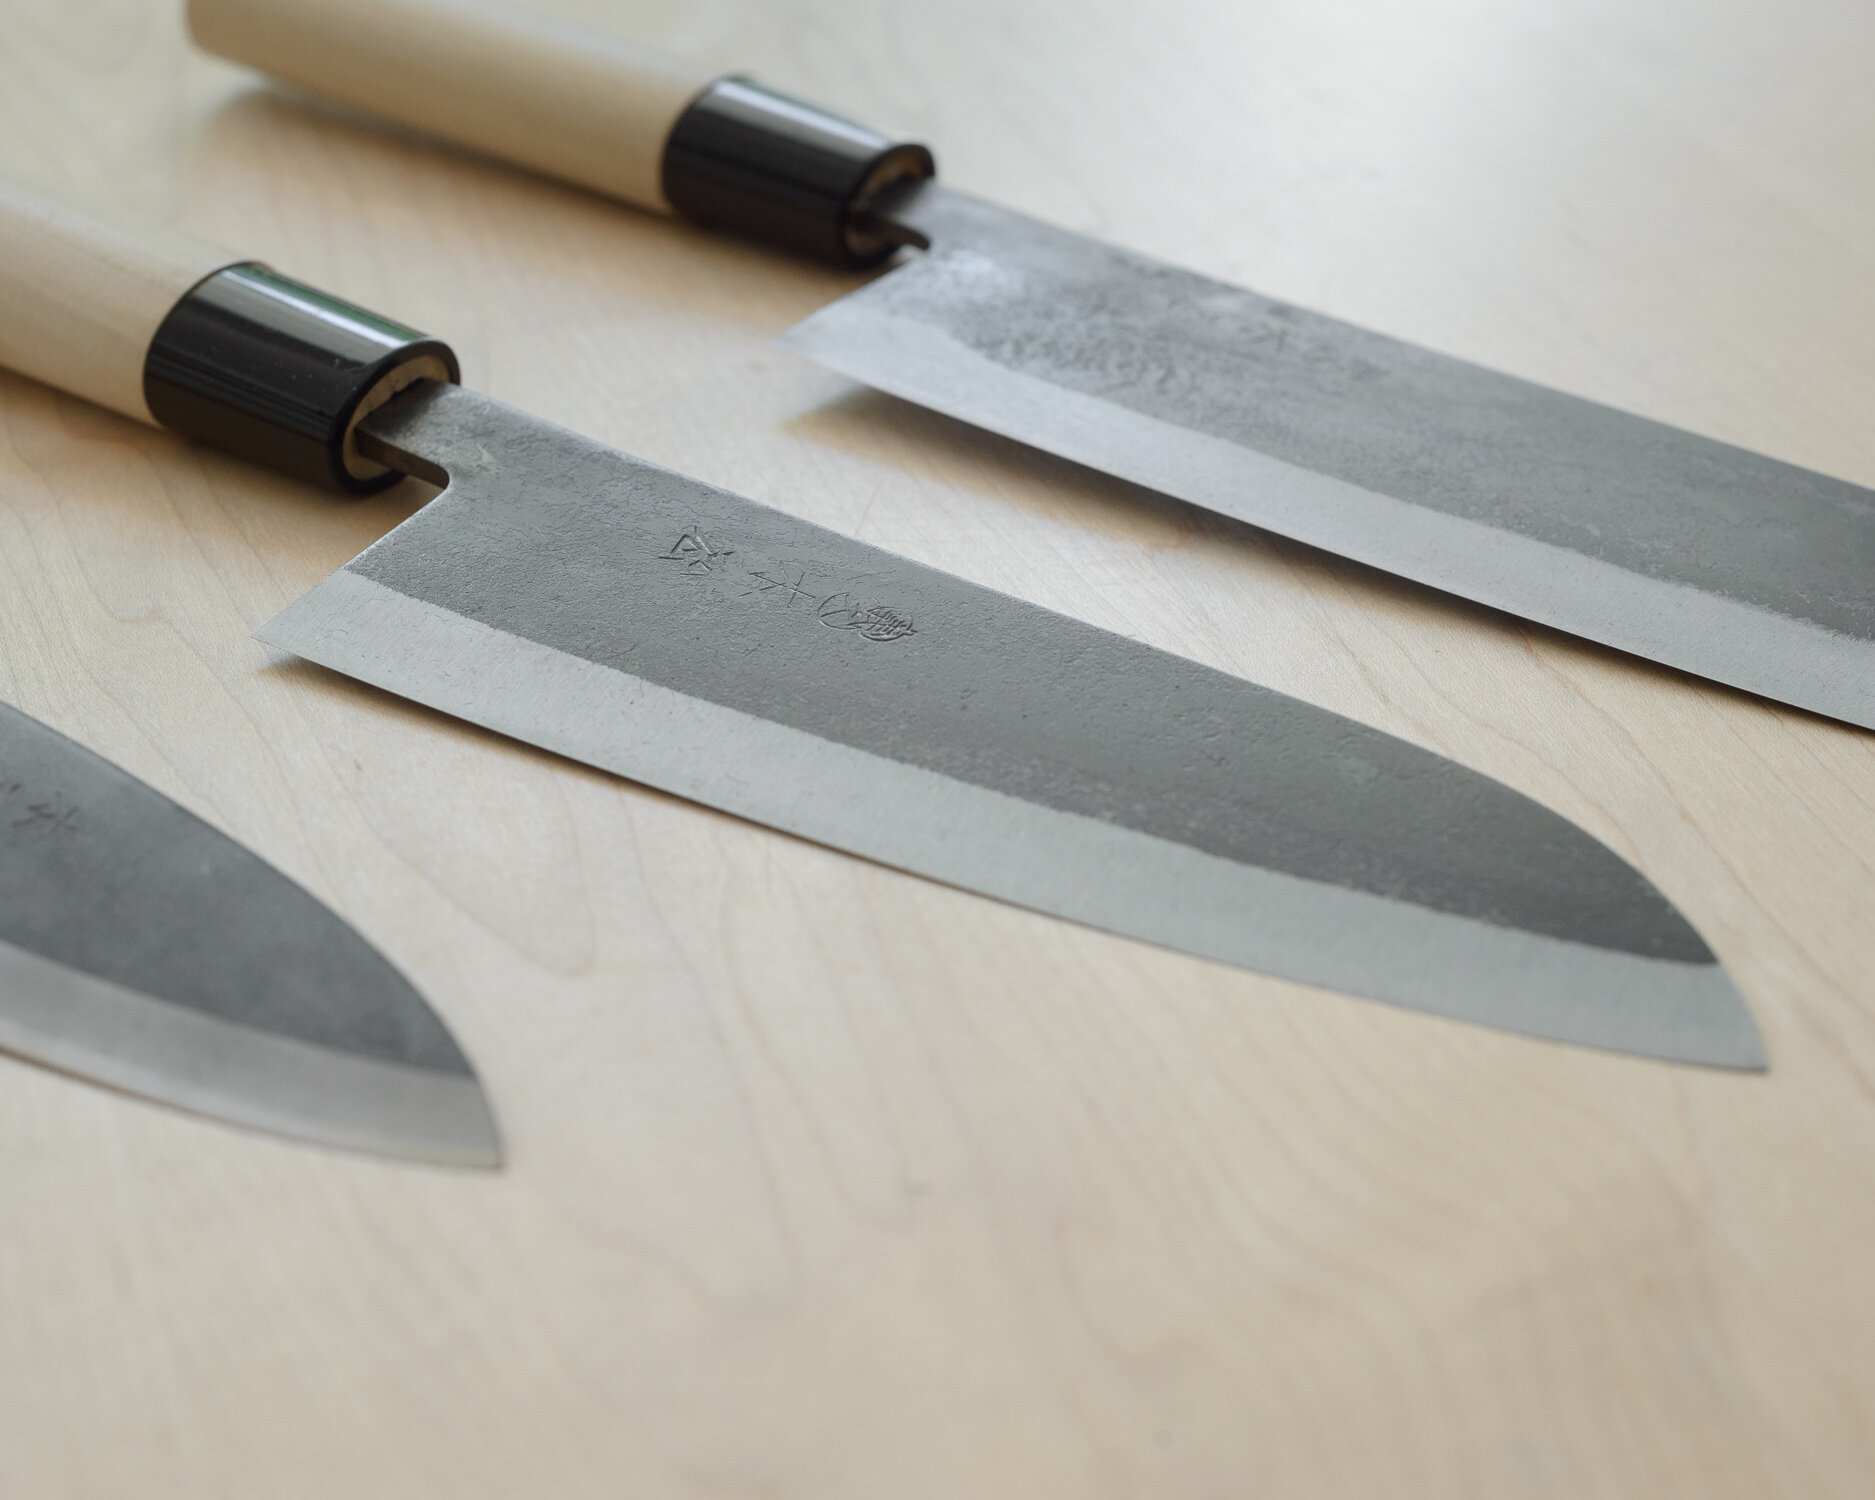 How to Care for Your Brand New Japanese Knife (Or Any Other Knife